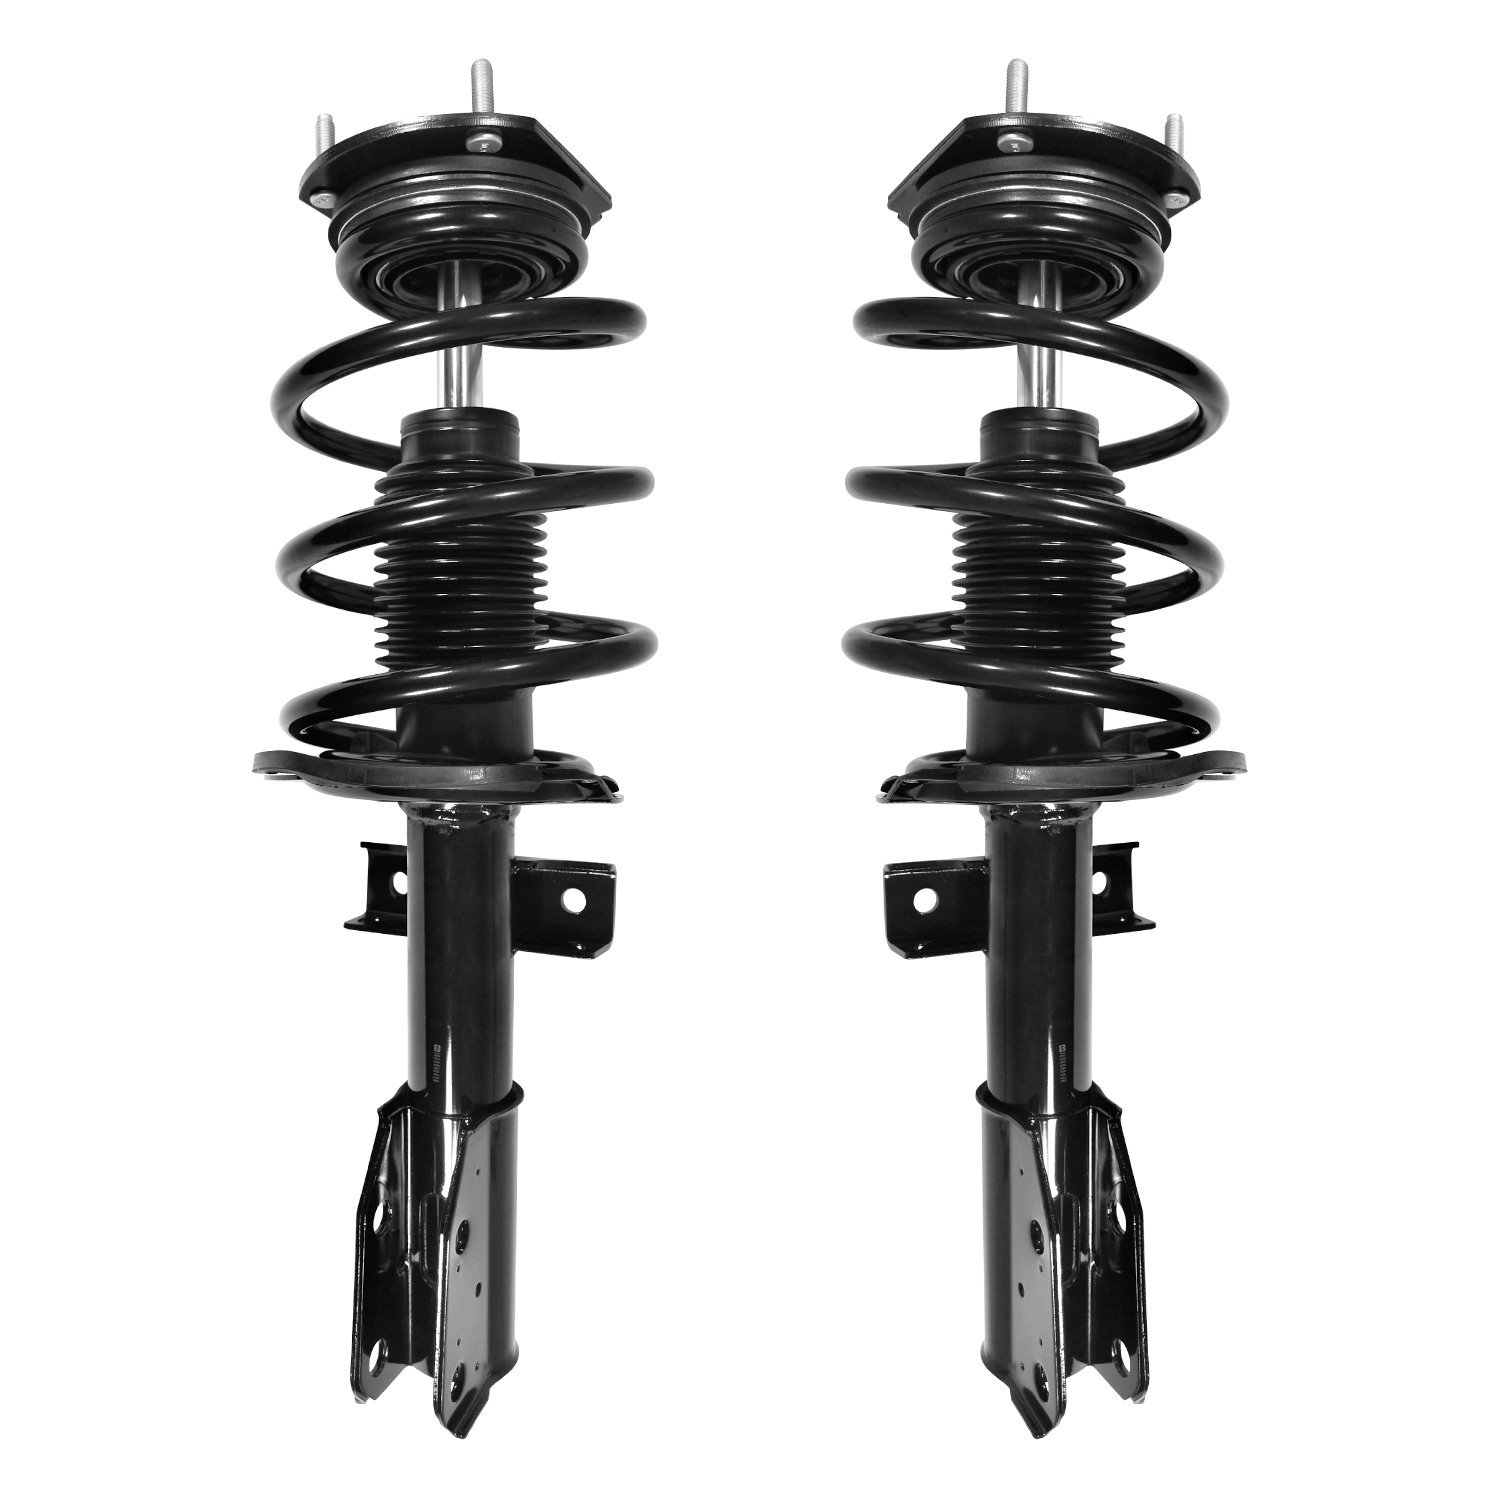 2-11680-001 Suspension Strut & Coil Spring Assembly Set Fits Select Buick Enclave, Chevy Traverse, GMC Acadia, Saturn Outlook